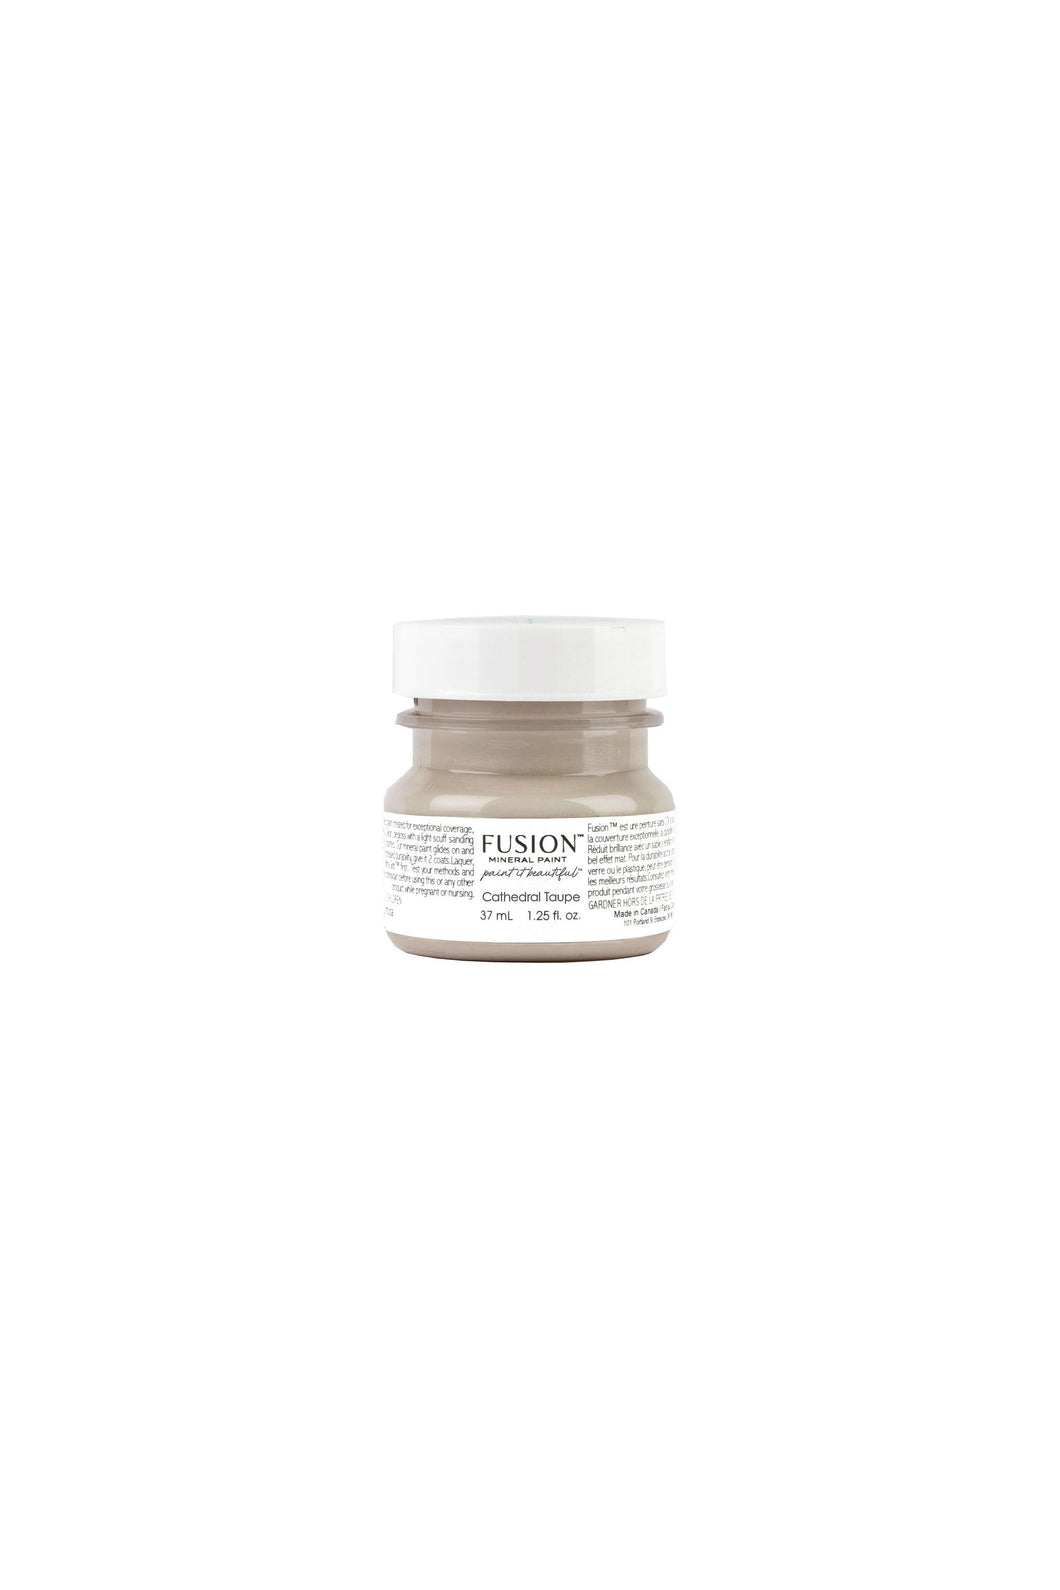 Fusion Mineral Paint - Cathedral Taupe 37 ml Jar